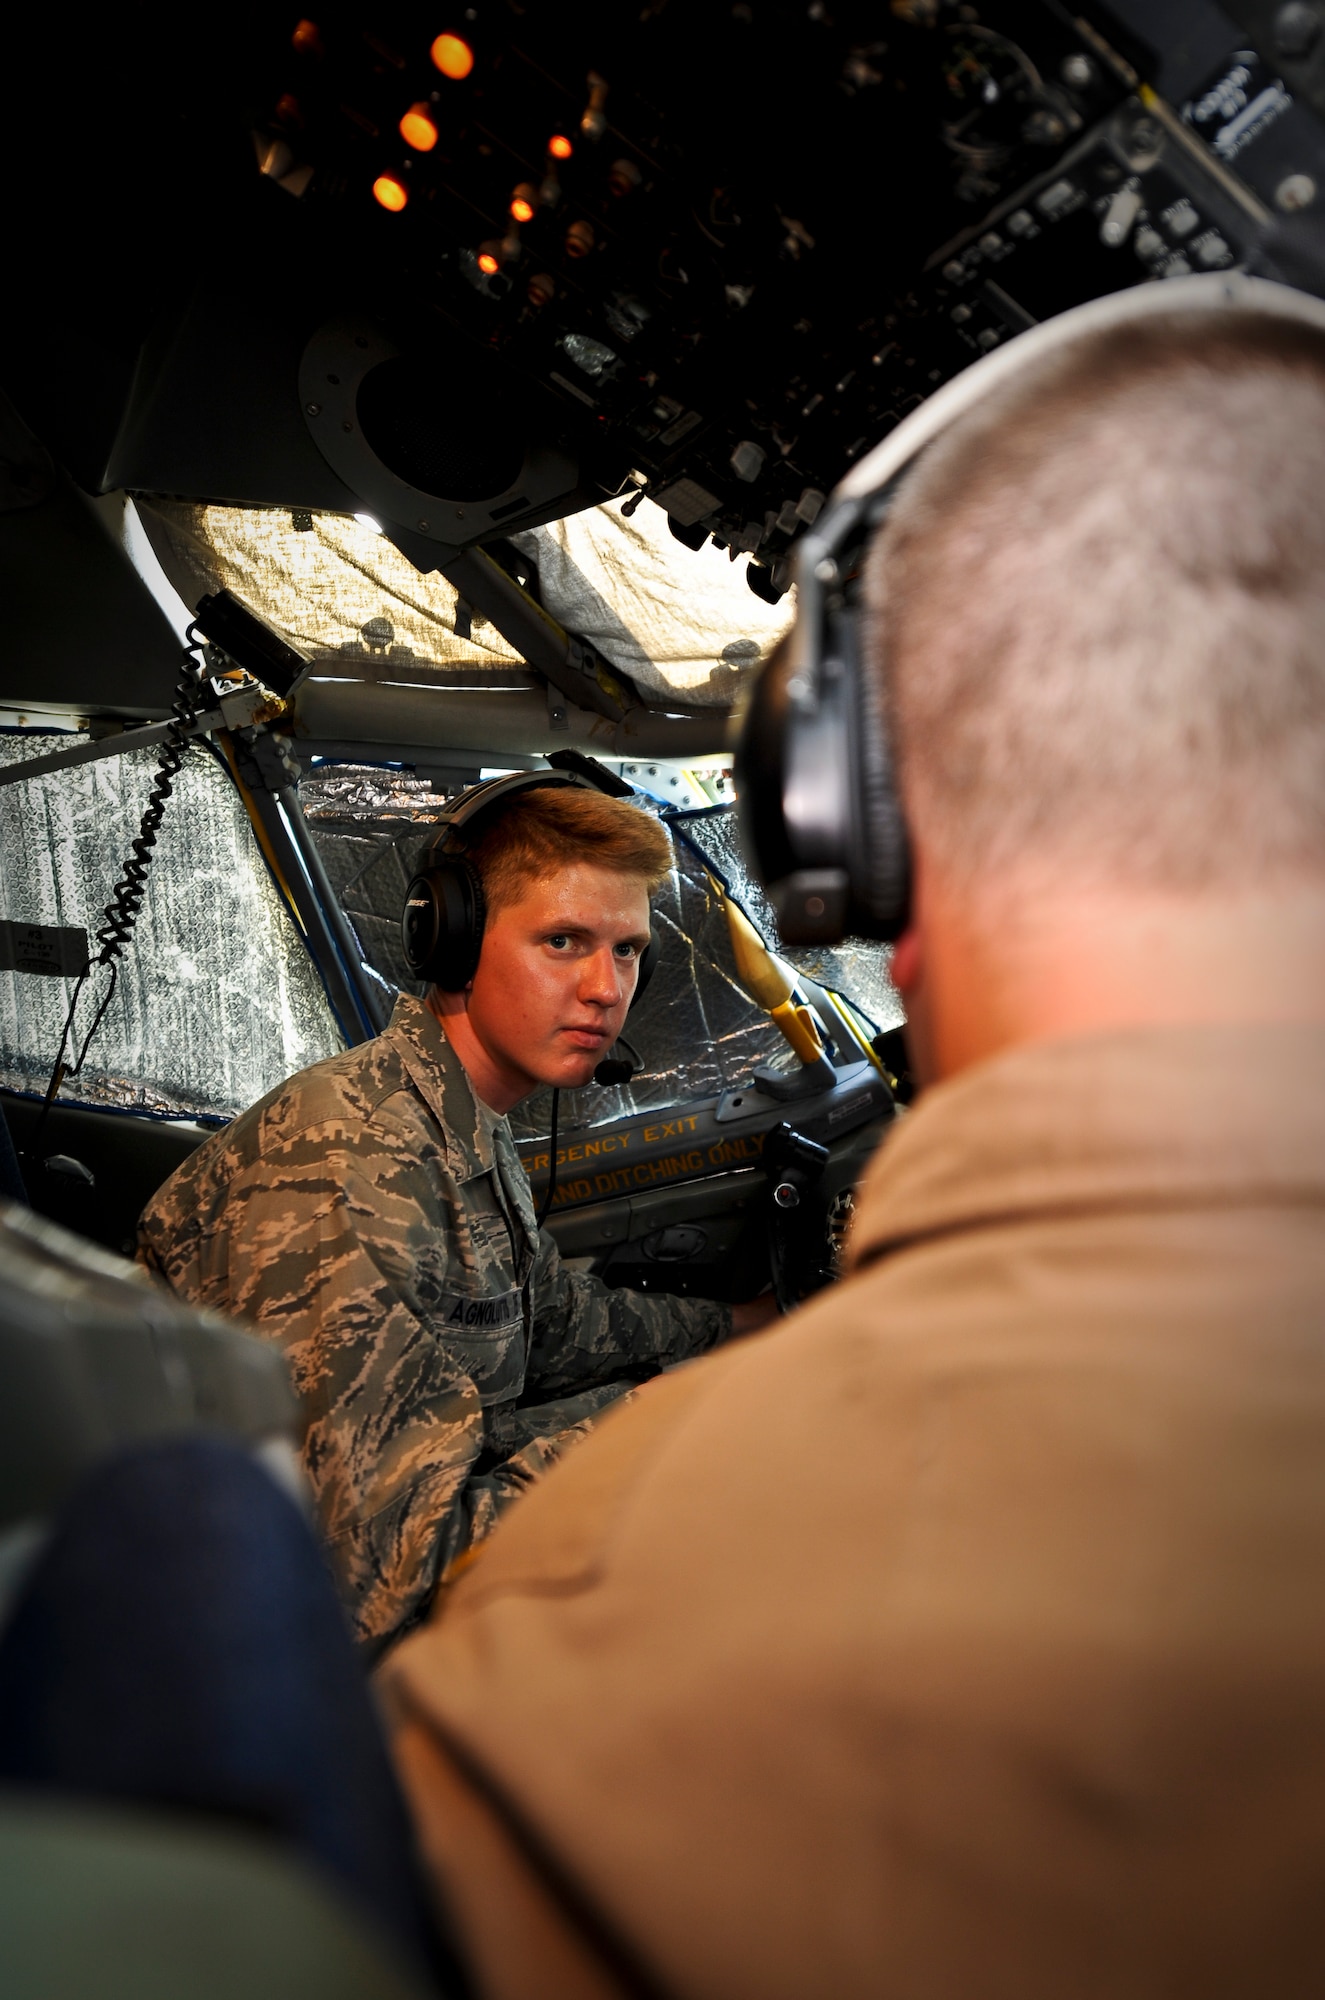 Capt. Eric Penney explains flight controls and general aircraft operations to Cadet Scott Agnolutto on board a KC-135 Stratotanker at the 379th Air Expeditionary Wing in Southwest Asia, June 24, 2013. Penney is a 340th Expeditionary Air Refueling Squadron pilot deployed from McConnell Air Force Base, Kan. More than 40 U.S. Air Force Academy cadets visited the 379th AEW in June observing deployed operations first-hand and interacting with deployed U.S. and coalition forces. (U.S. Air Force photo/Senior Airman Benjamin Stratton)